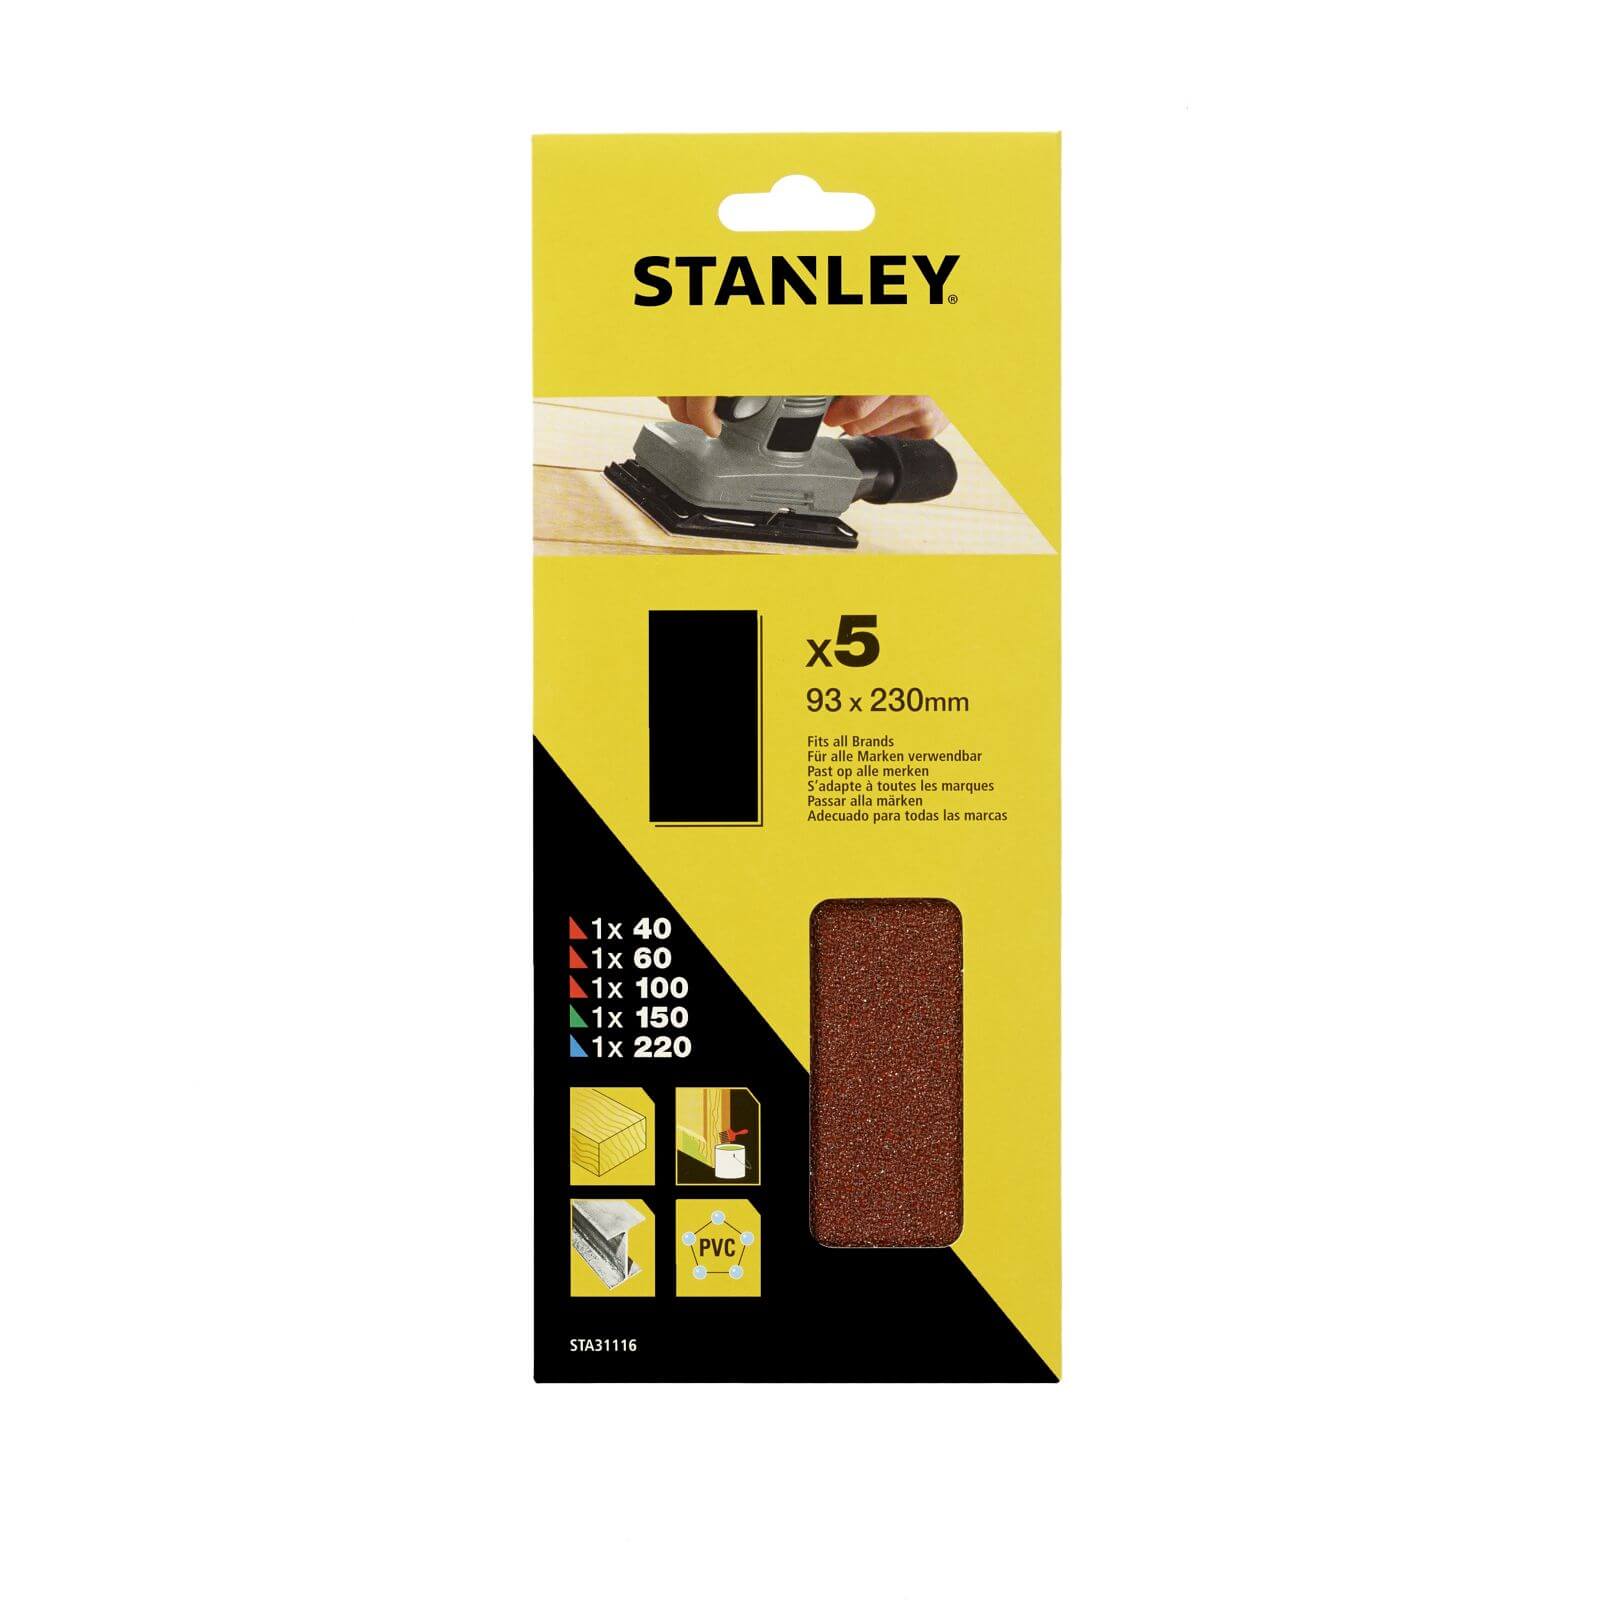 Photo of Stanley 1/3 Sheet Sander Unpunched Wire Clip Mixed Sanding Sheets - Sta31116-xj